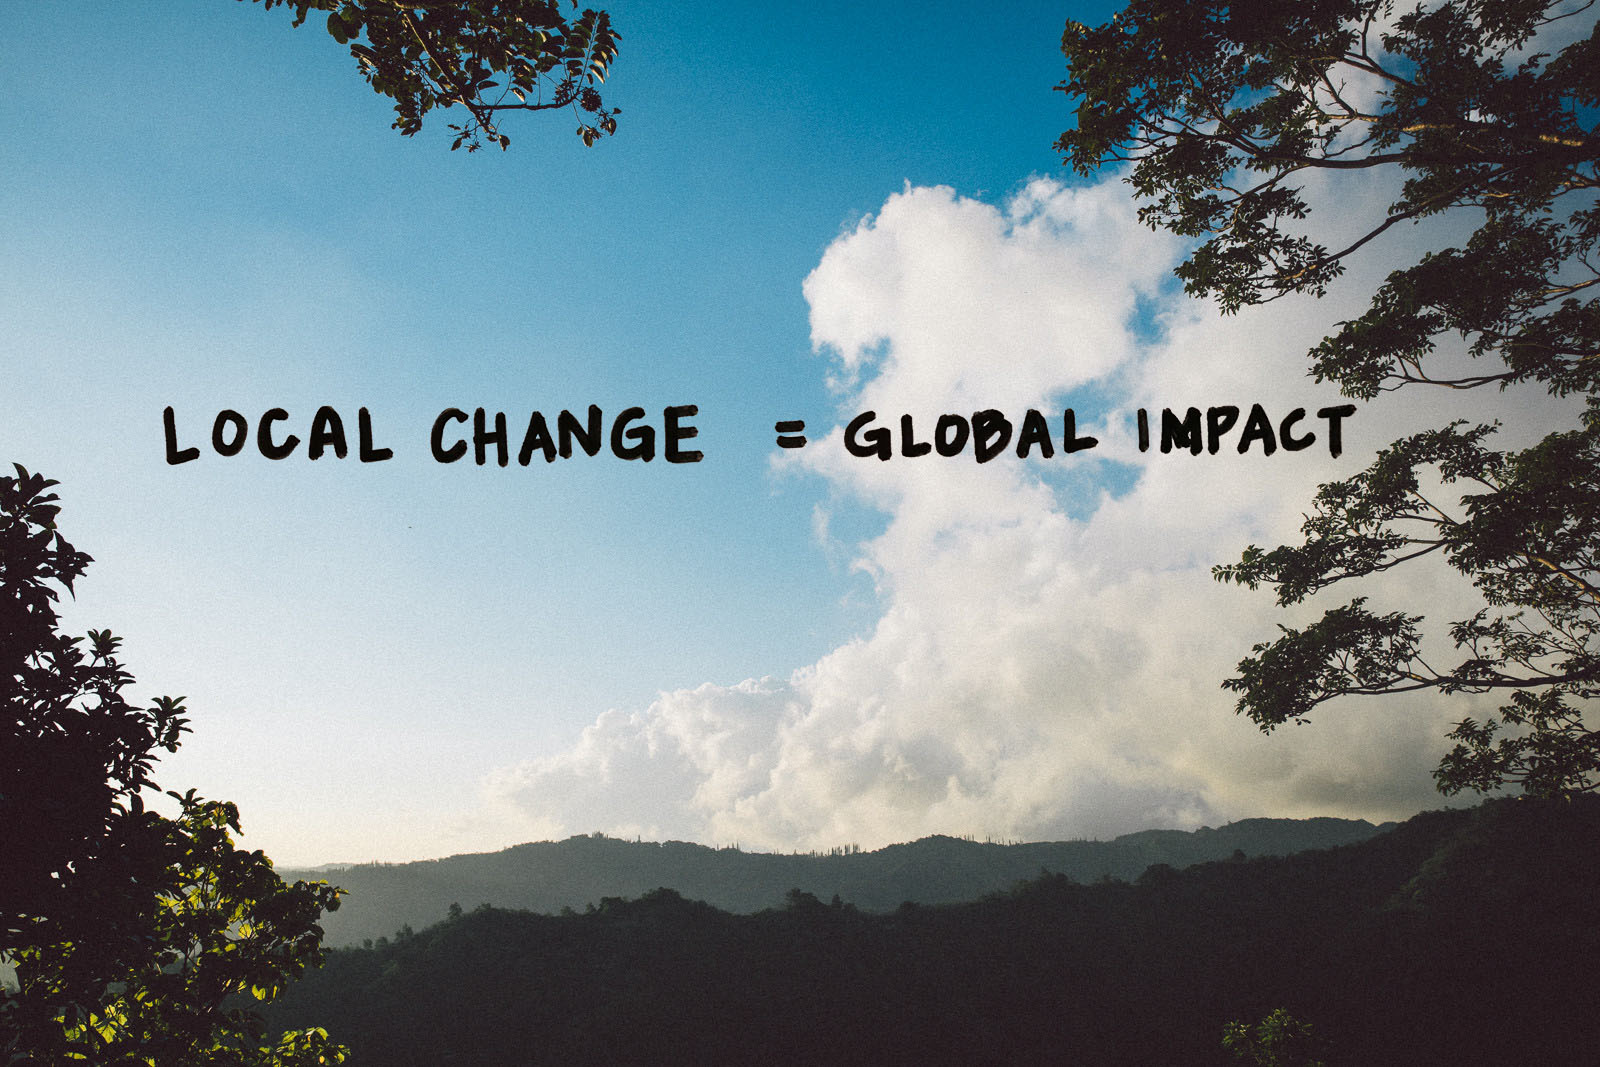 Local change equals to global impact